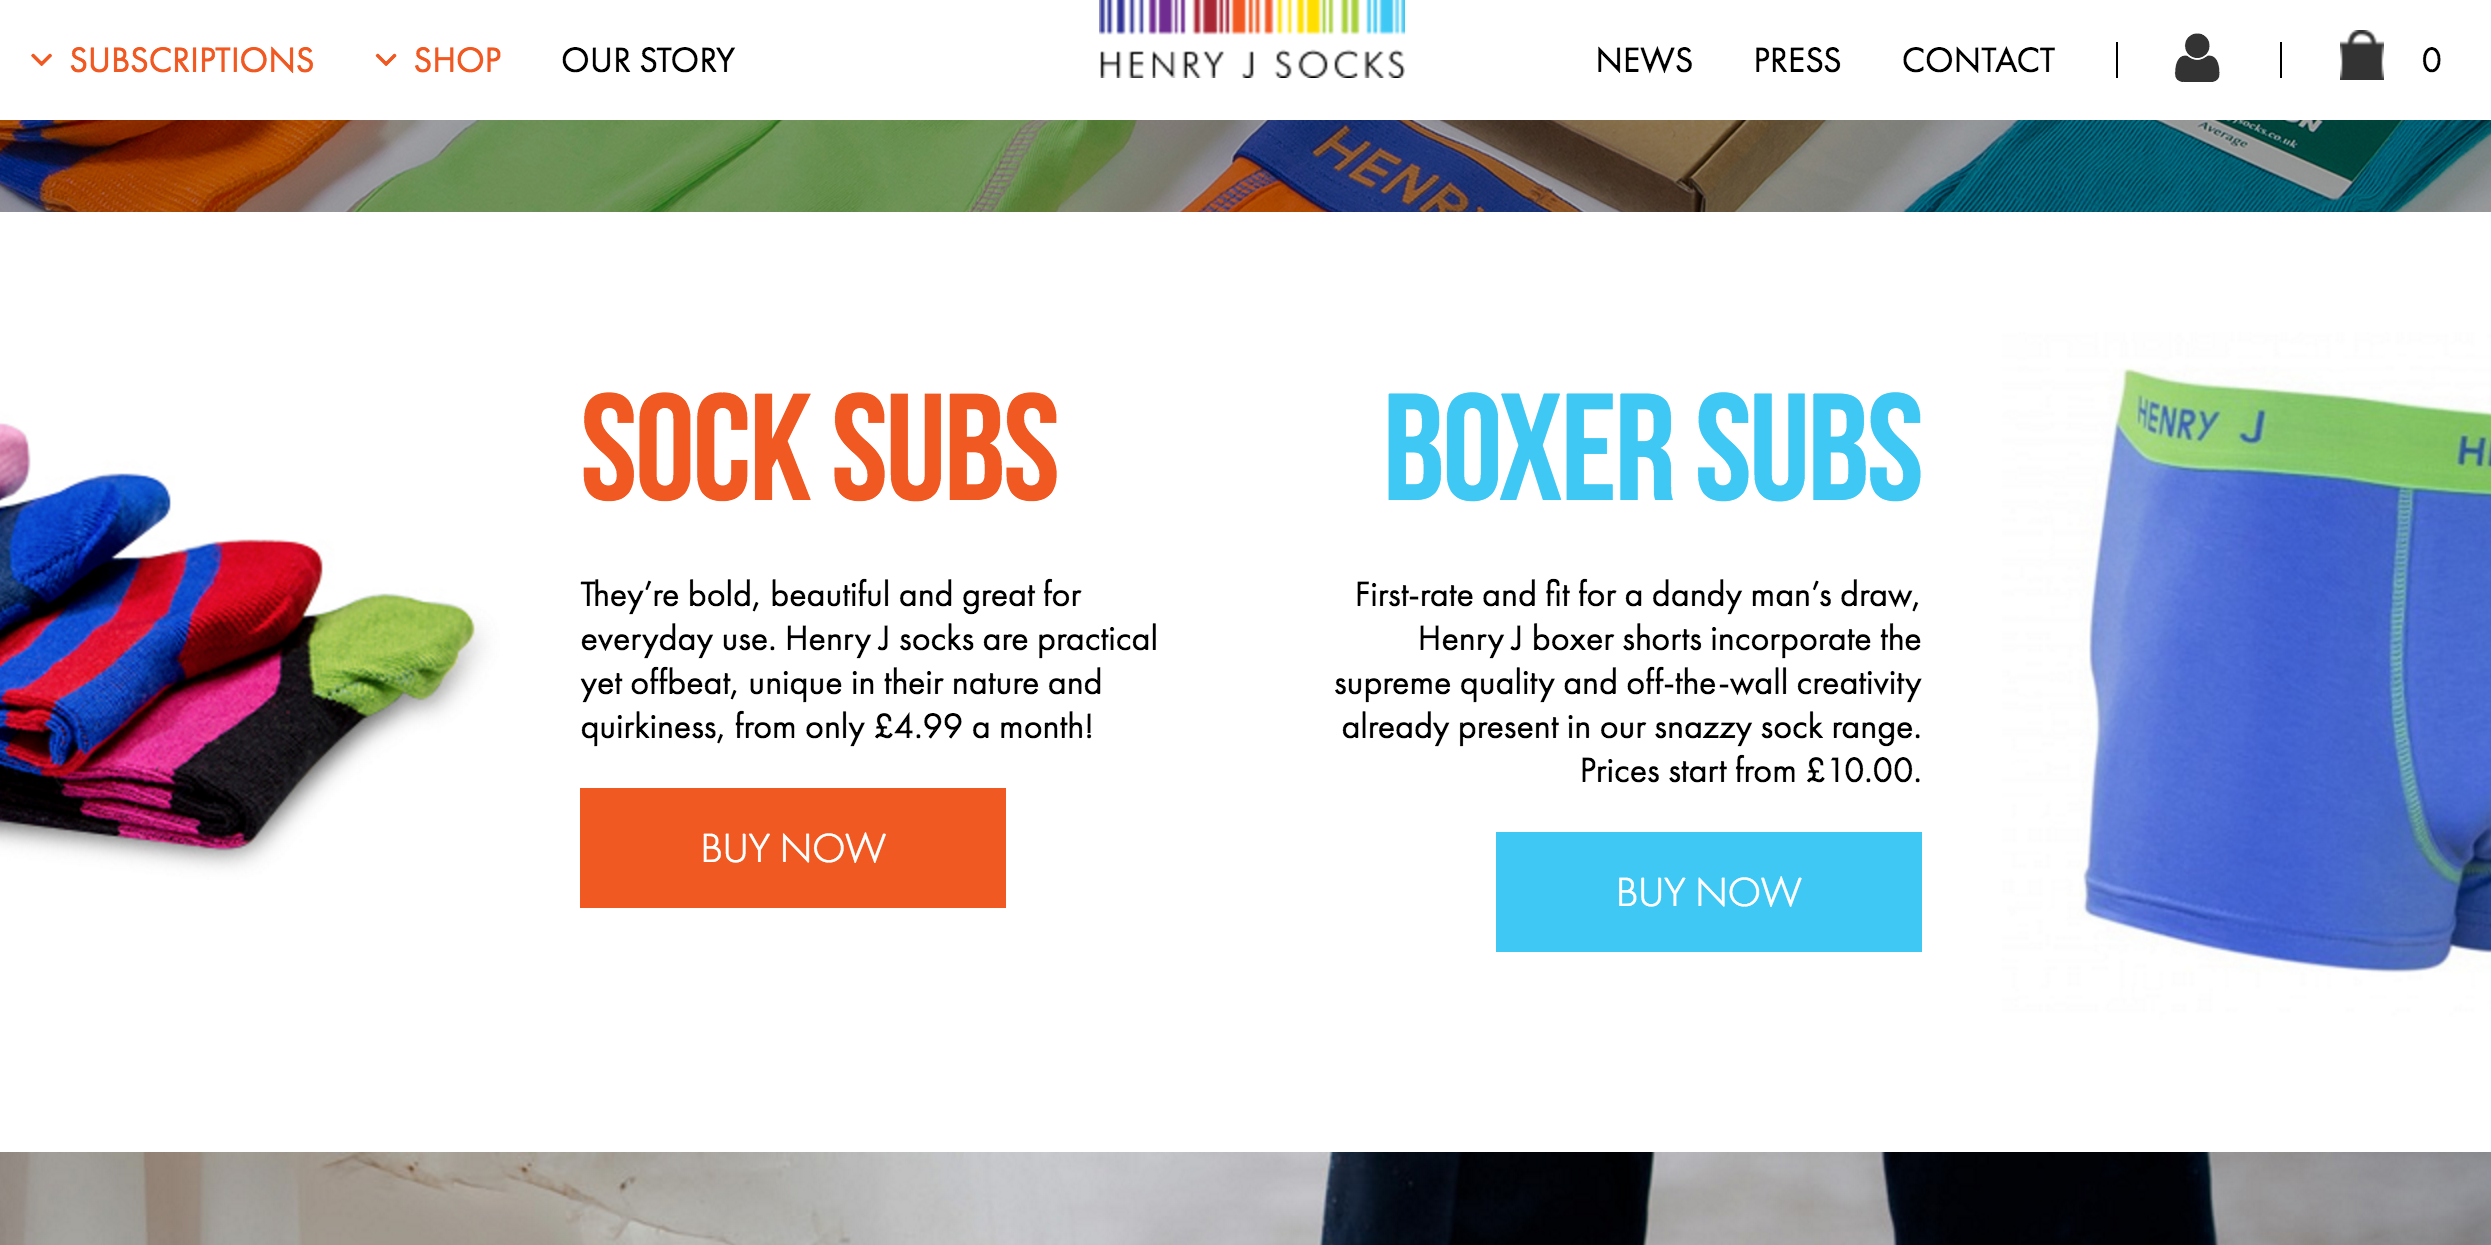 Pricing for both options is visible in the copy, and the buttons lead interested shoppers to full details.